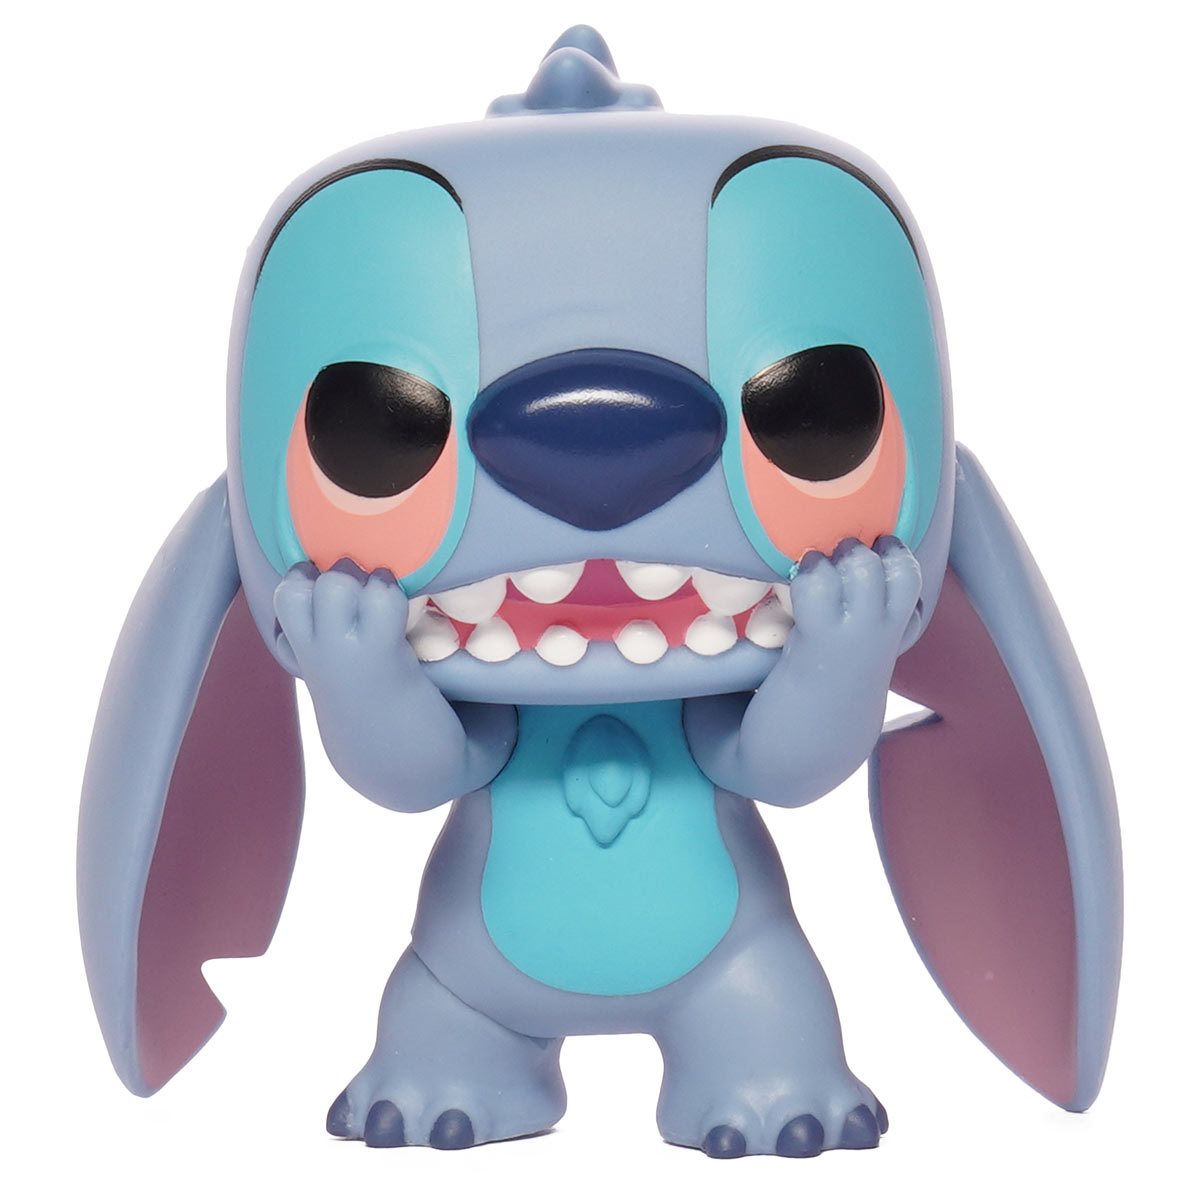 Funko Pop Vinyl Action Figure Lilo Stitch Smiling Seated Kids Collectible Toy 